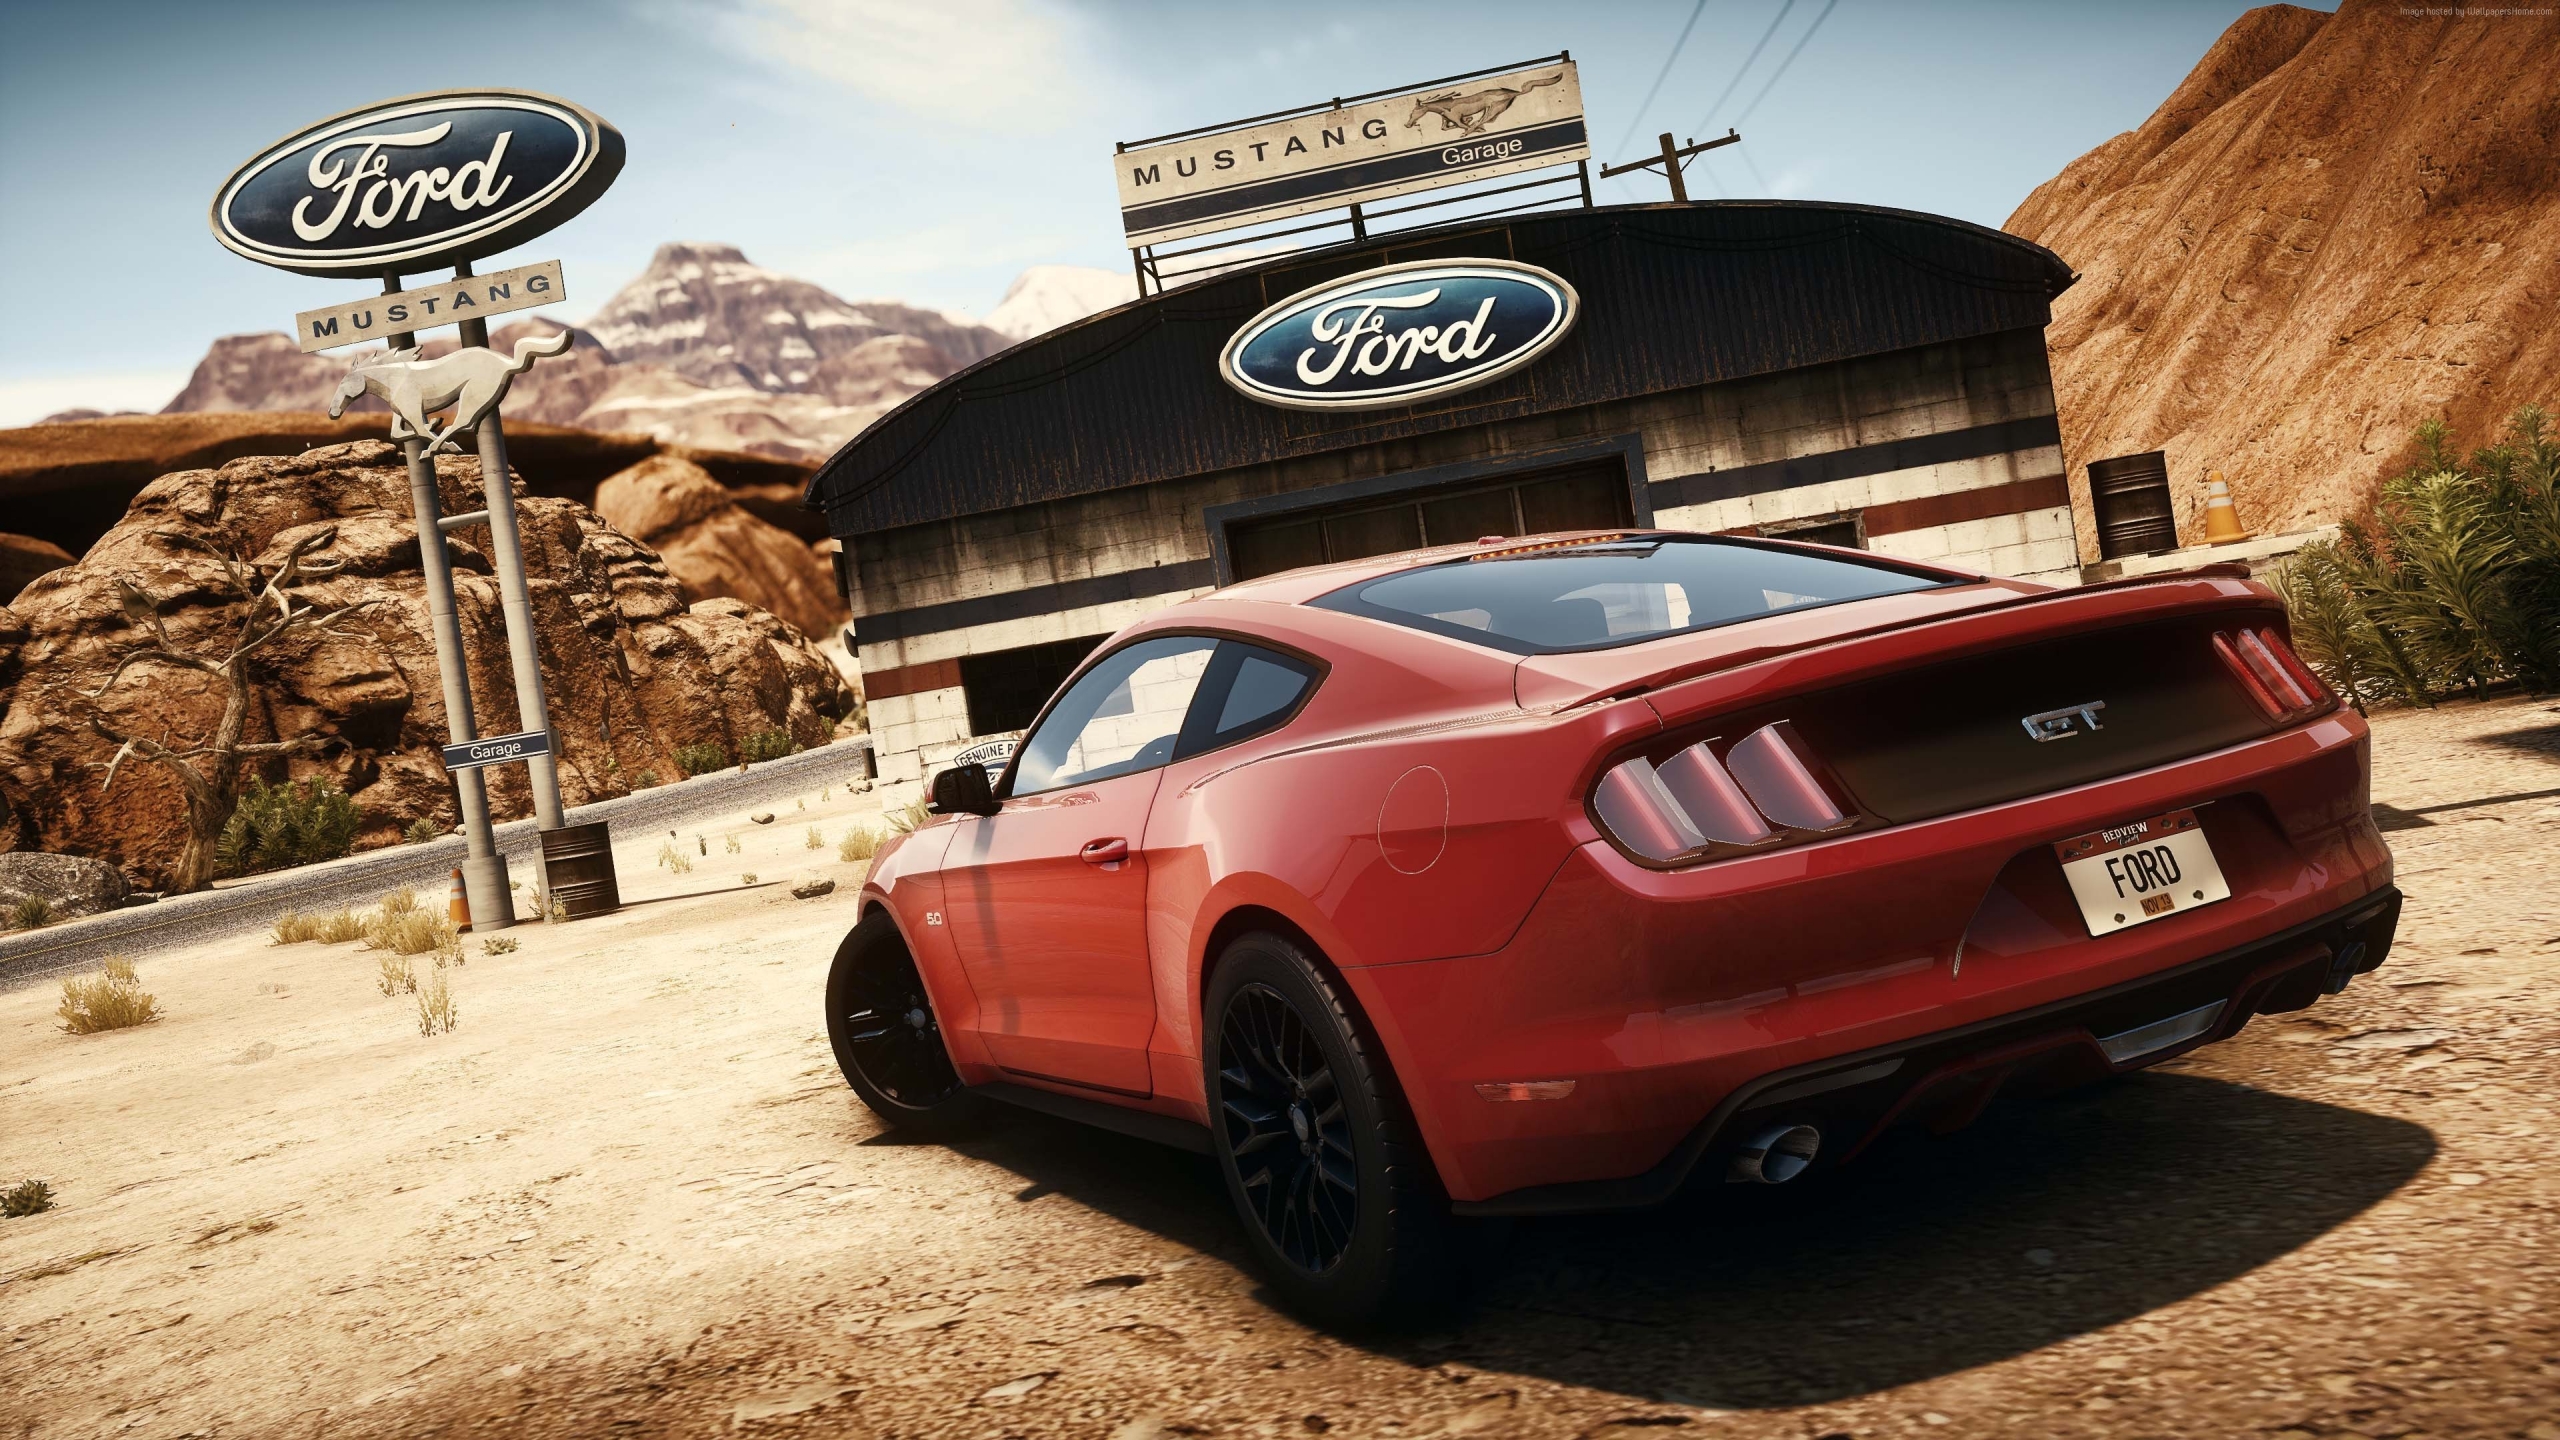 Need For Speed Ford Mustang for 2560x1440 HDTV resolution